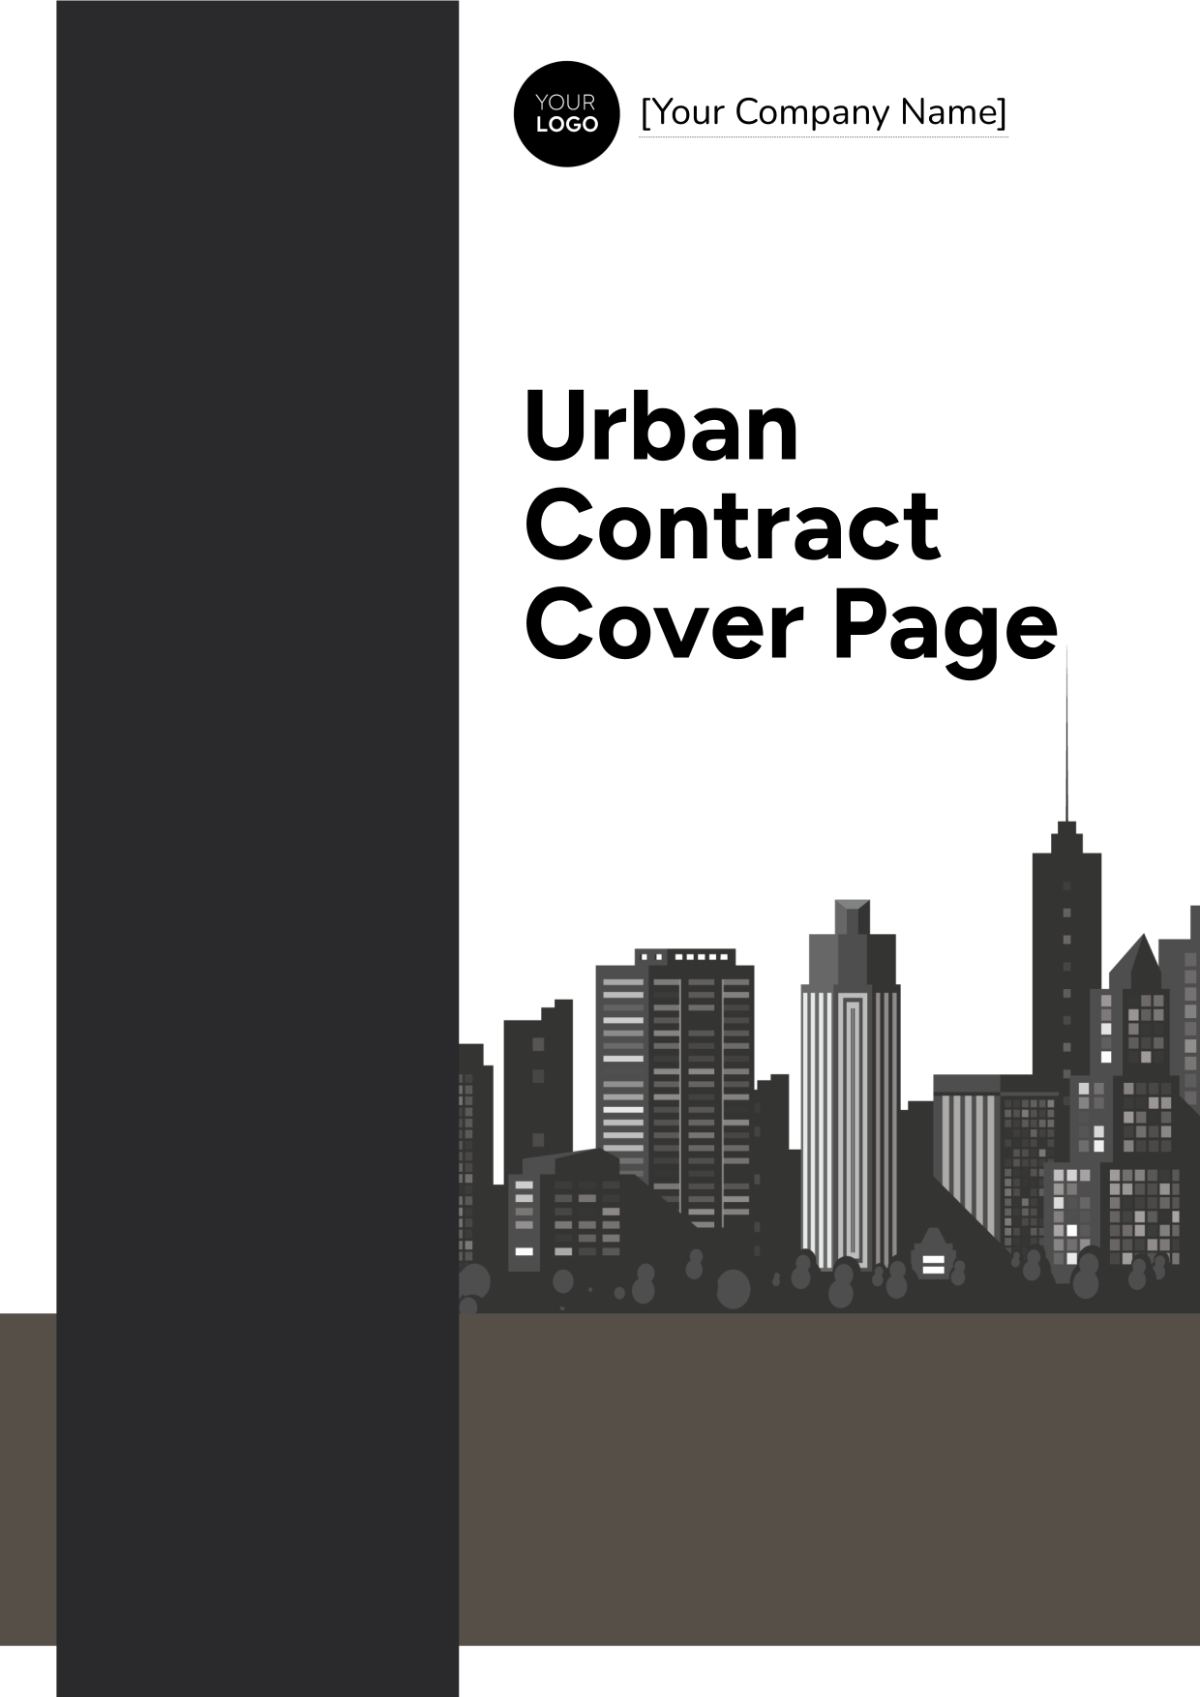 Urban Contract Cover Page Template